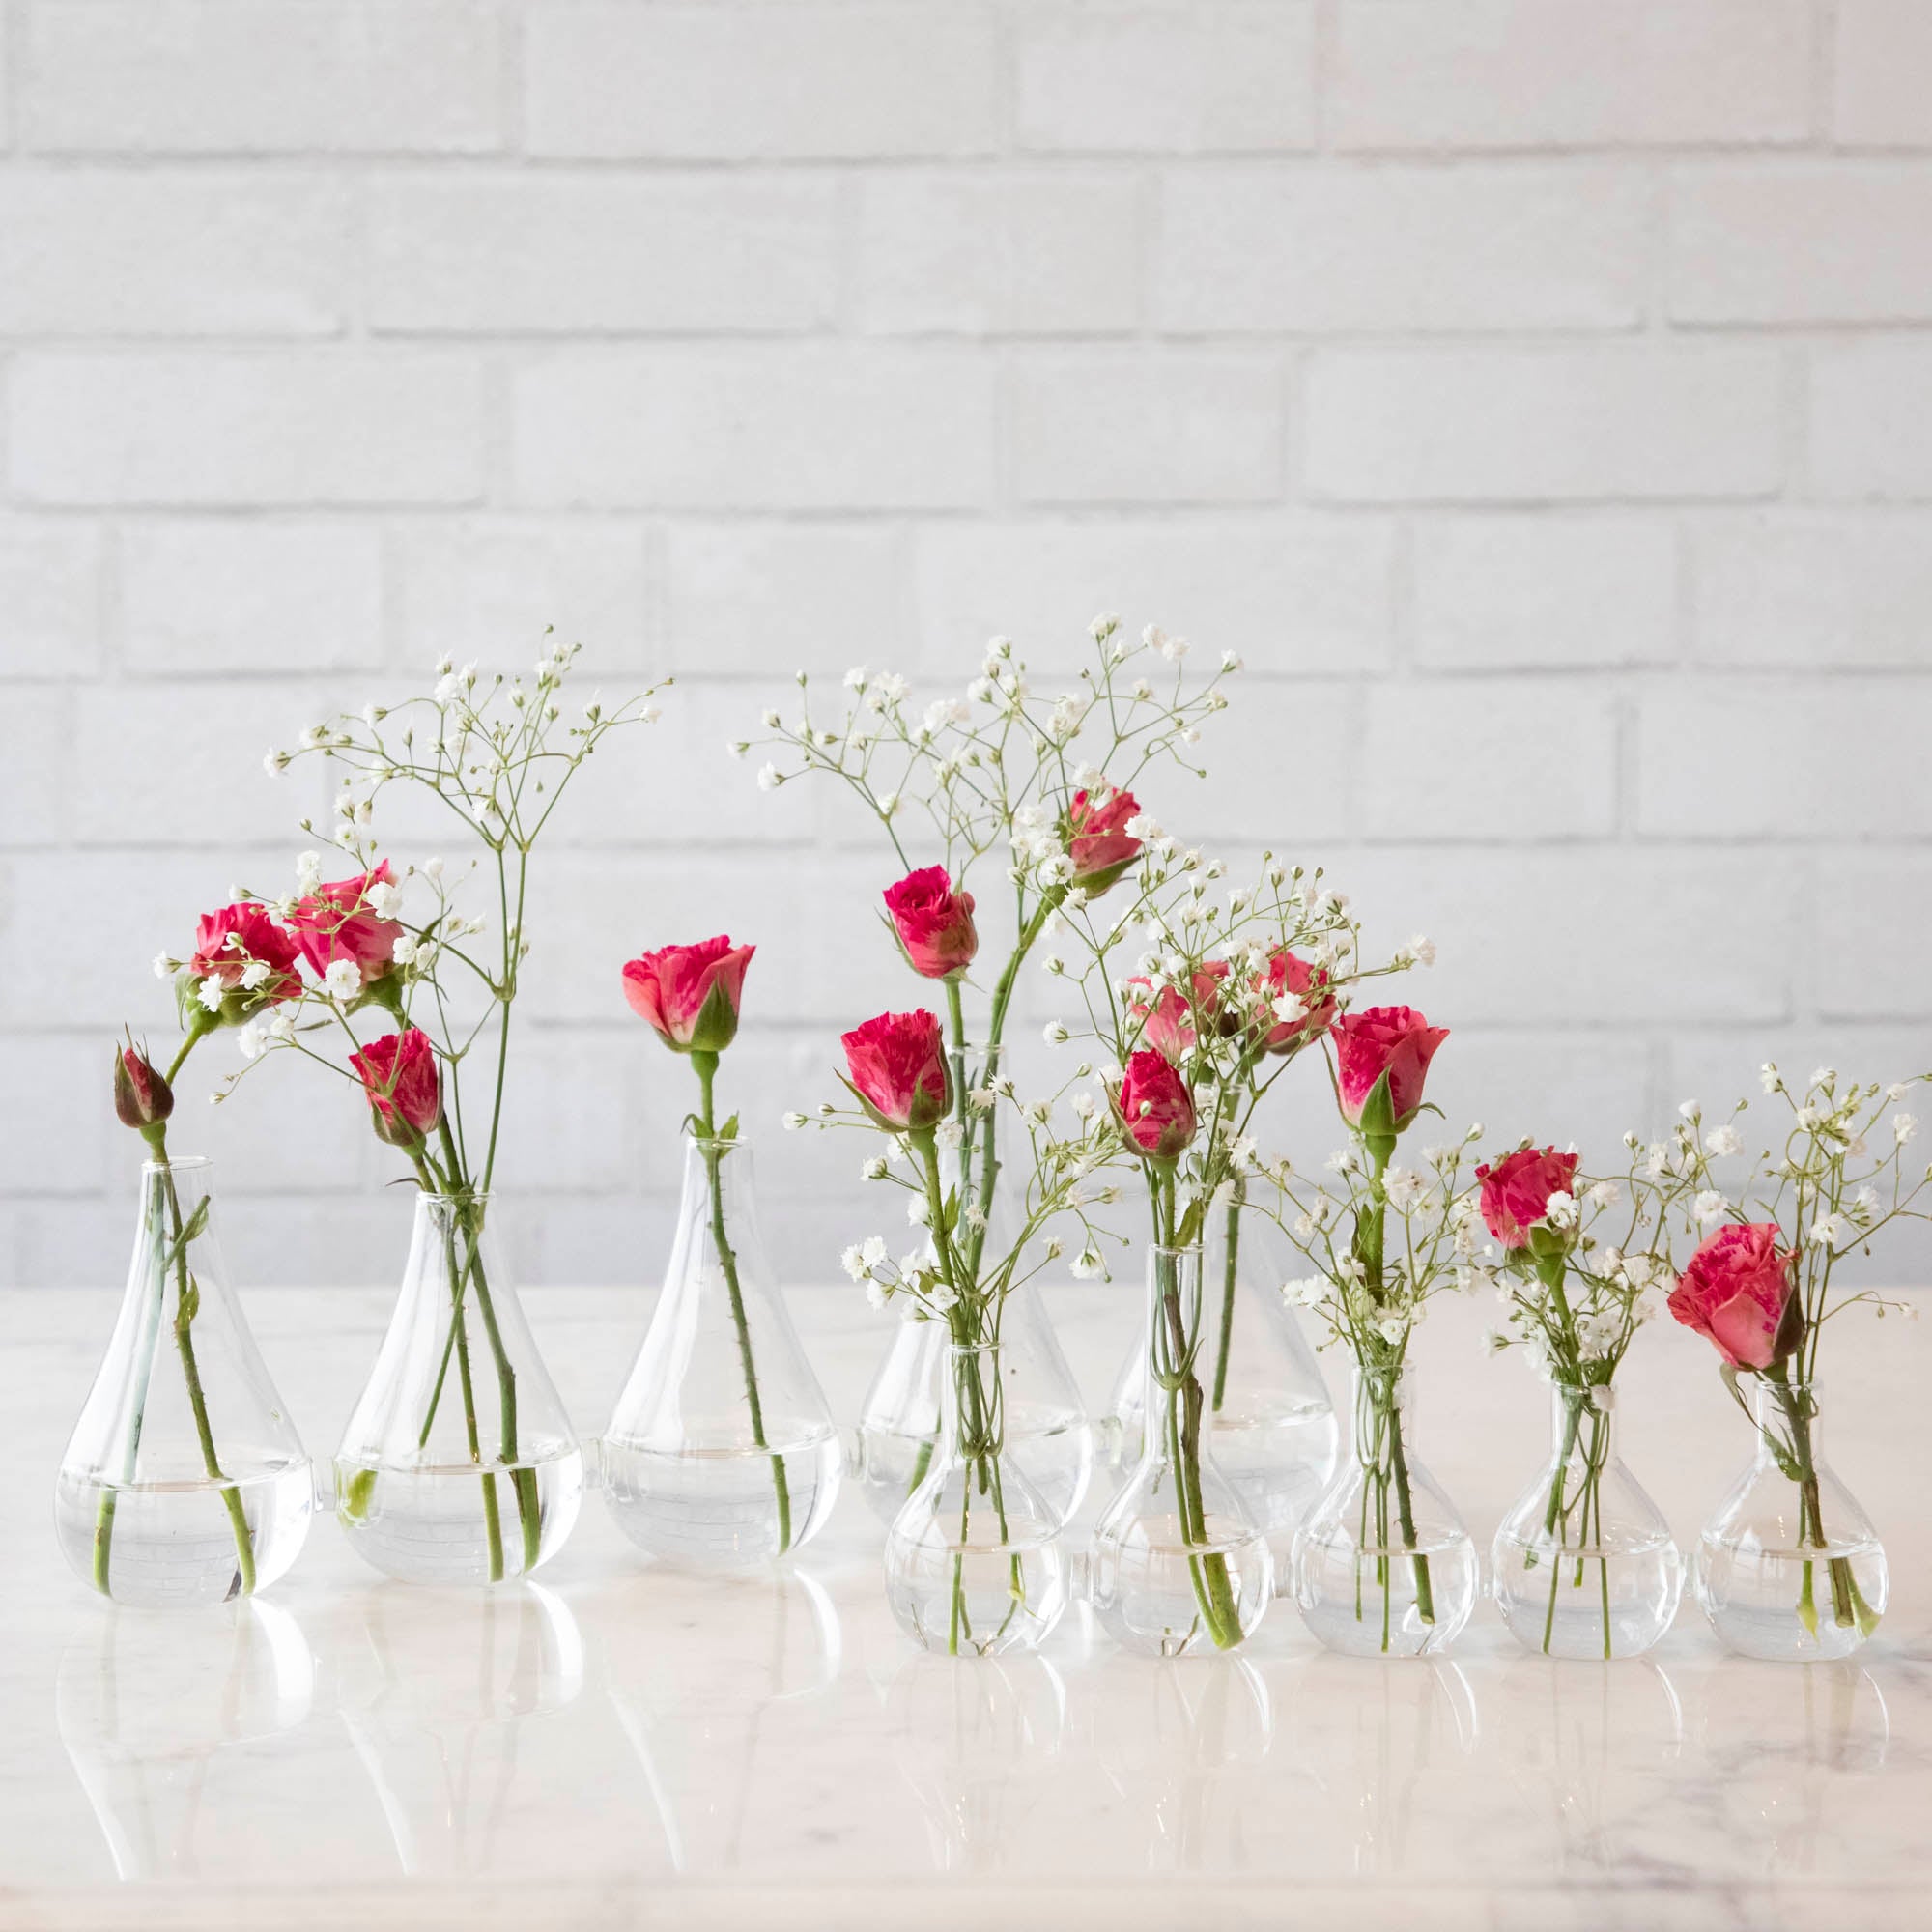 Five Quintet Glass Vases of varying shapes holding floral cuttings of pink roses and baby&